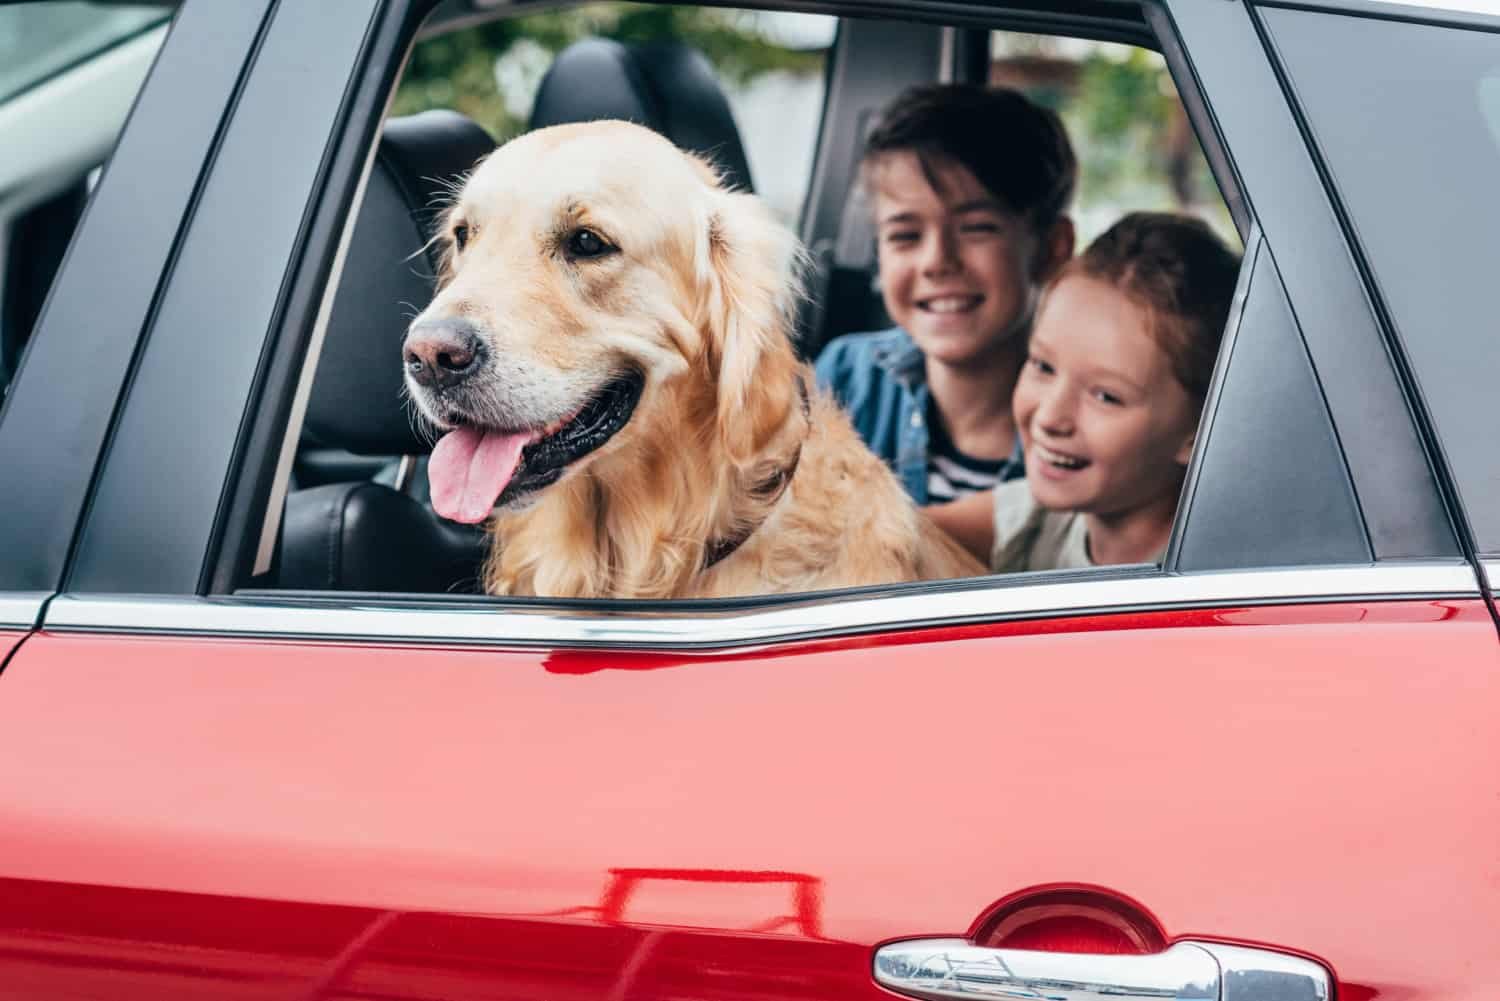 Dog and children in the car on a pet friendly vacation in a theme park with kennels